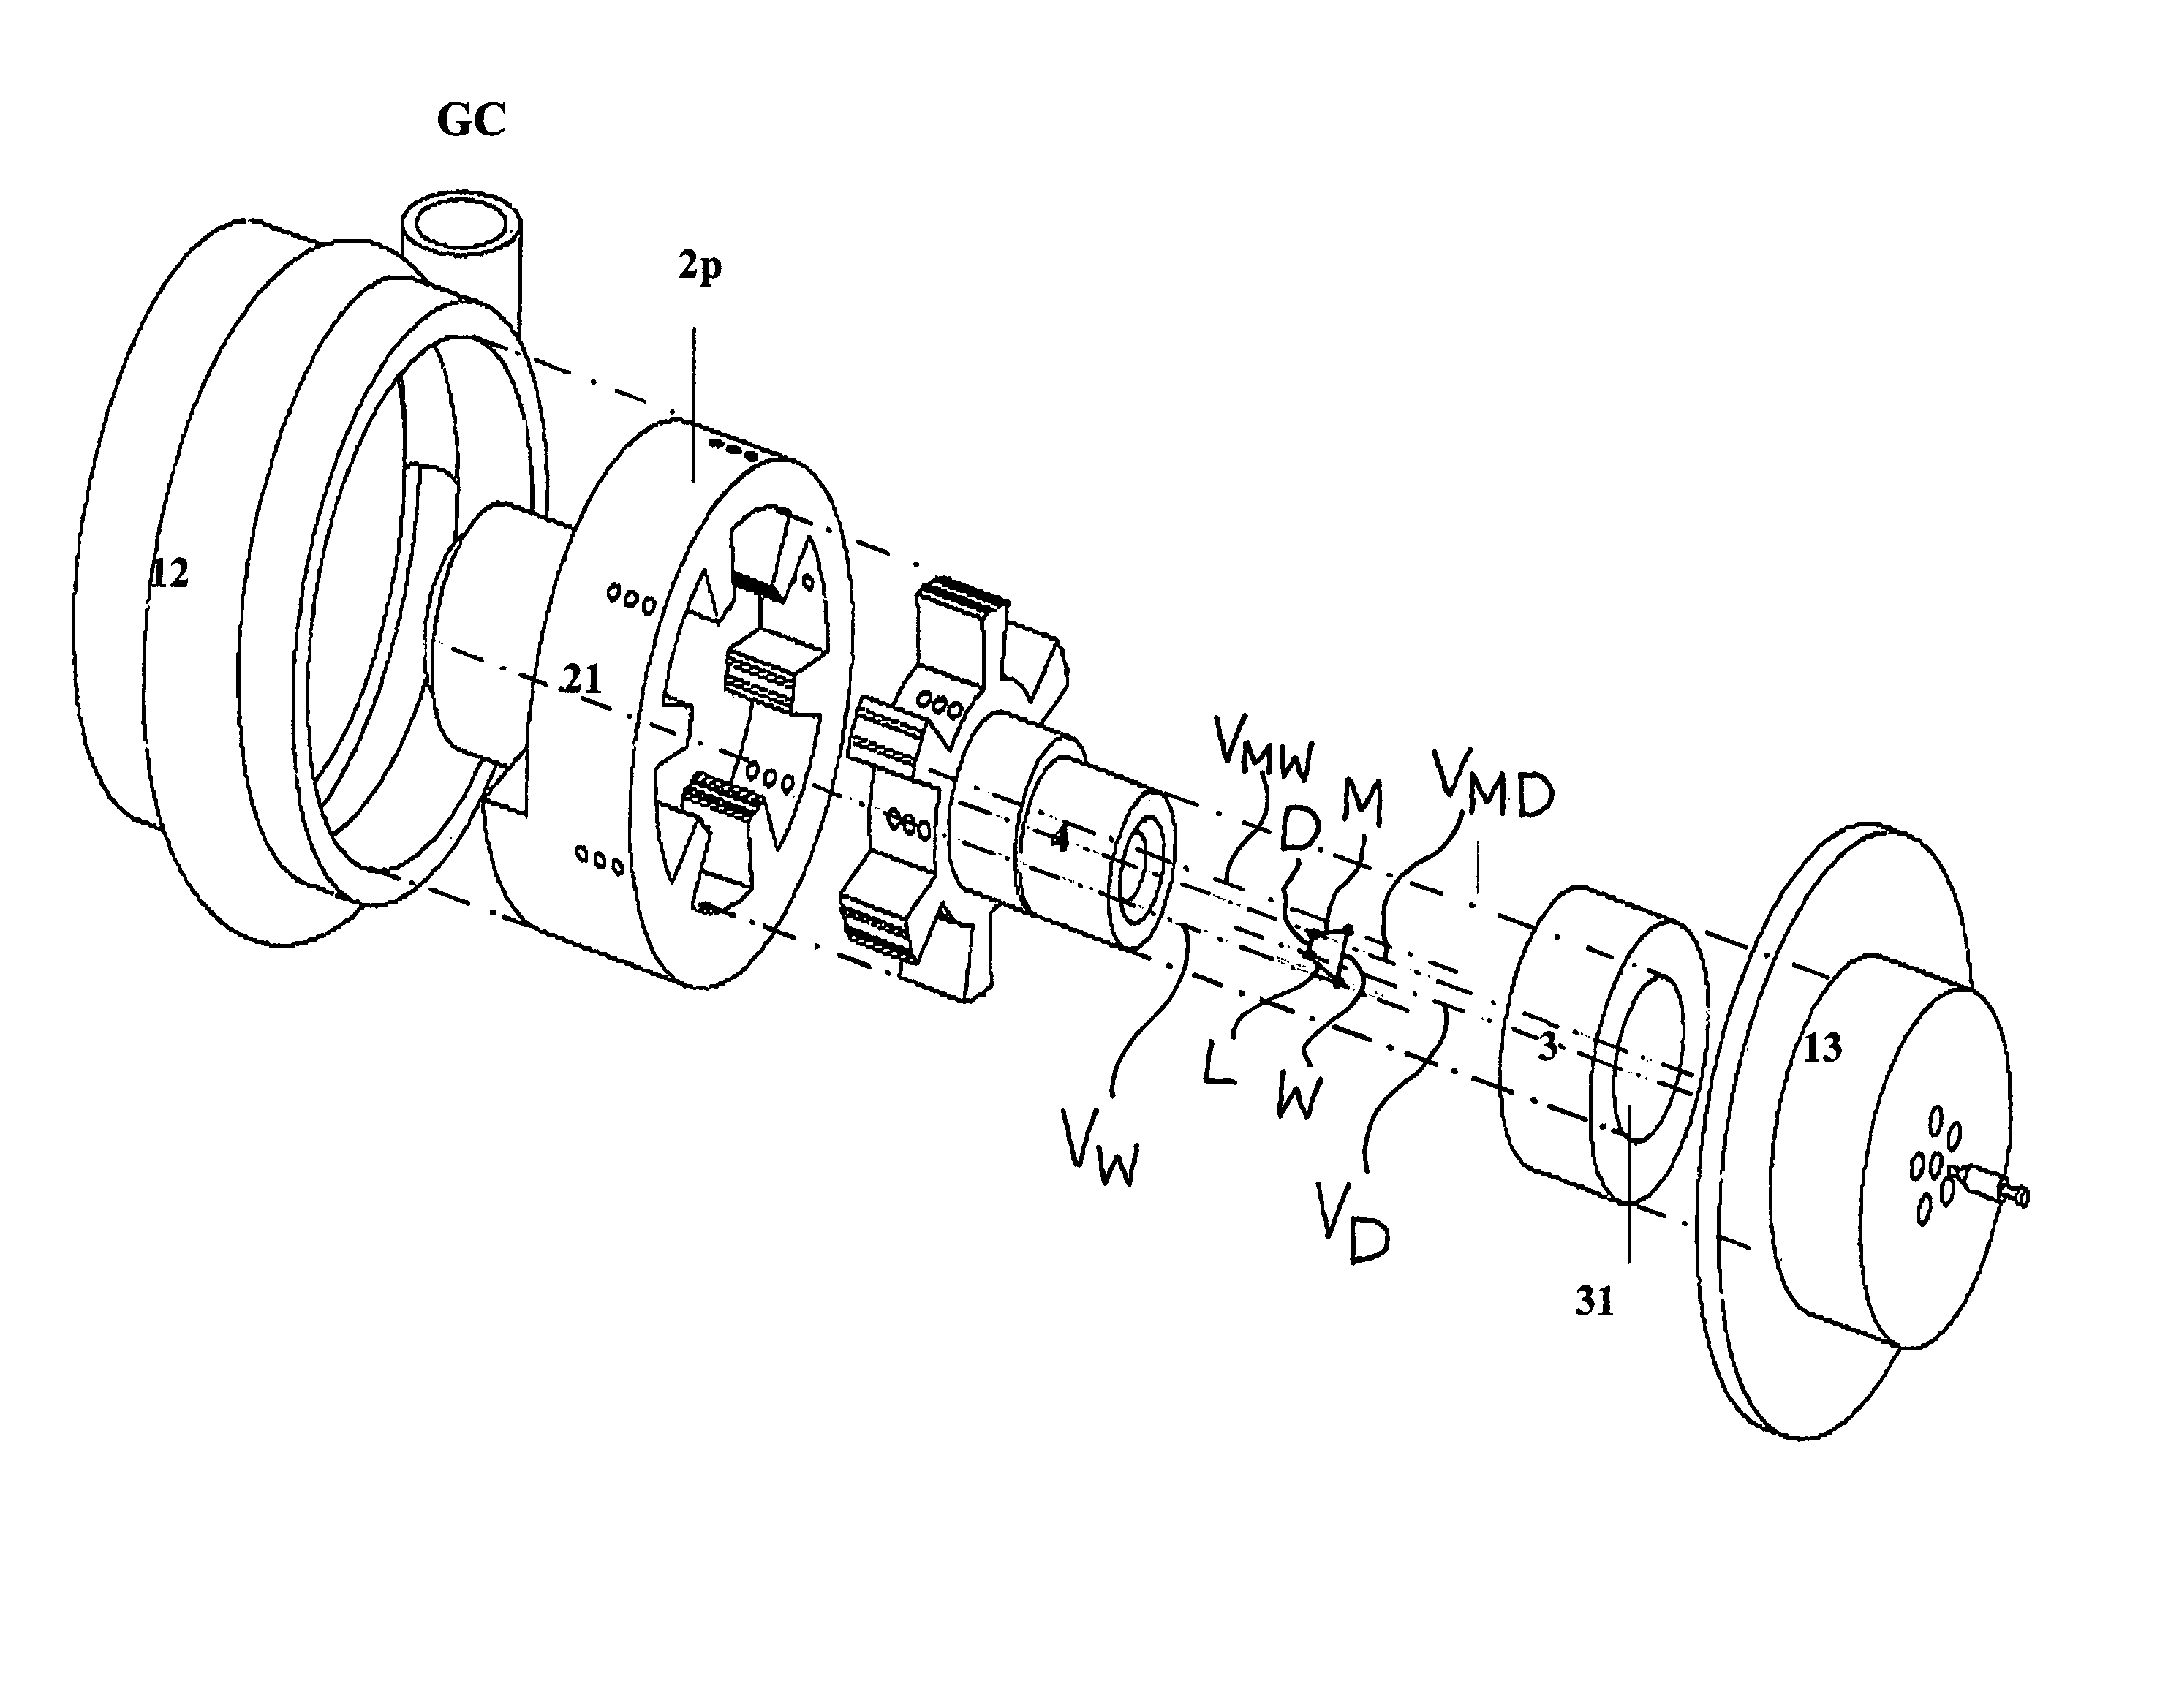 Internal combustion two stroke rotary engine system